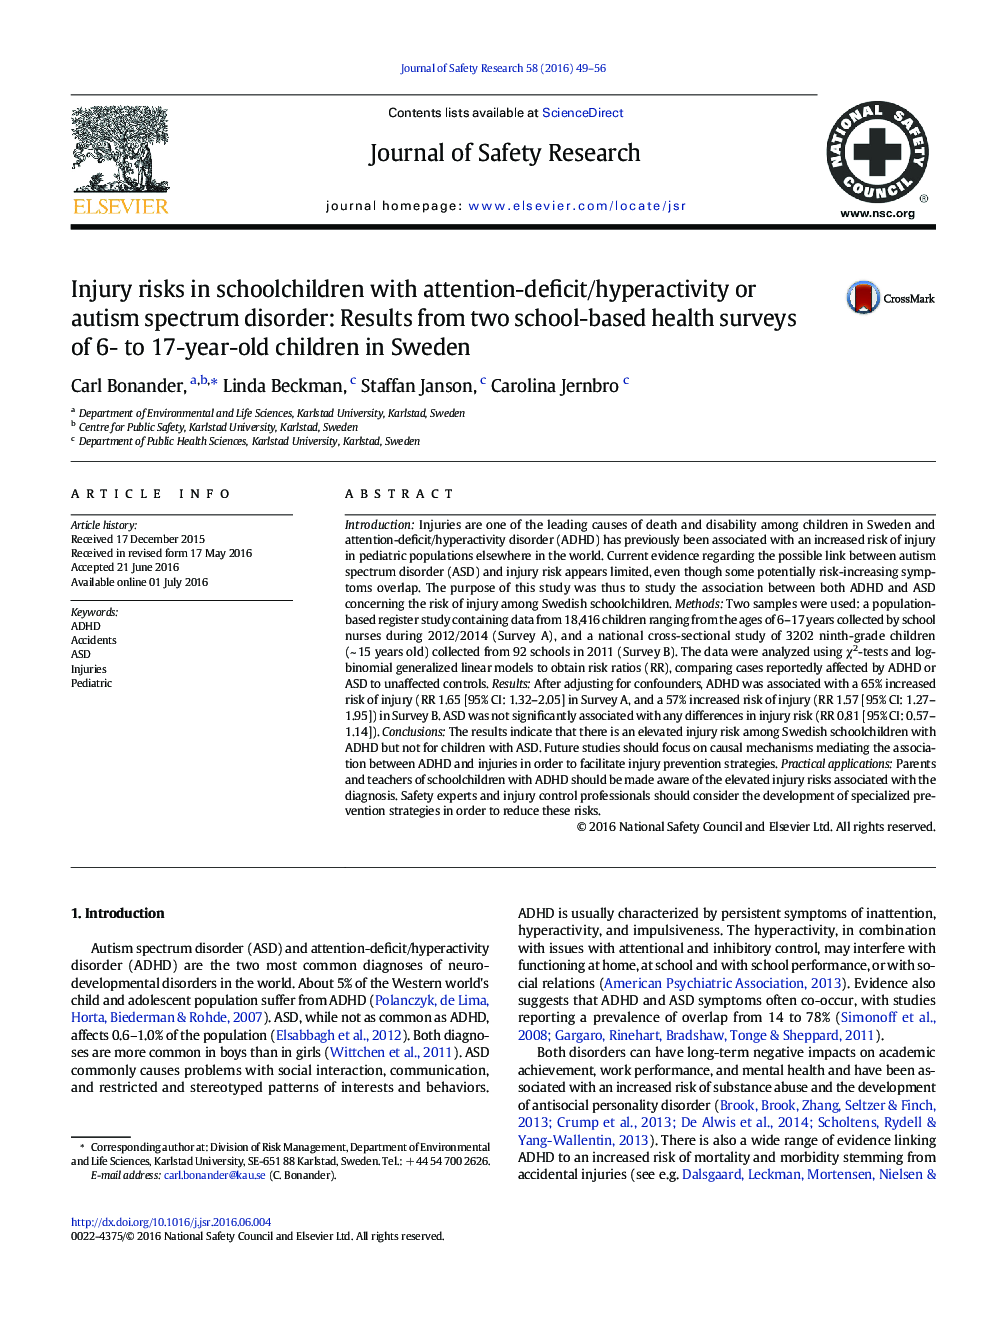 Injury risks in schoolchildren with attention-deficit/hyperactivity or autism spectrum disorder: Results from two school-based health surveys of 6- to 17-year-old children in Sweden